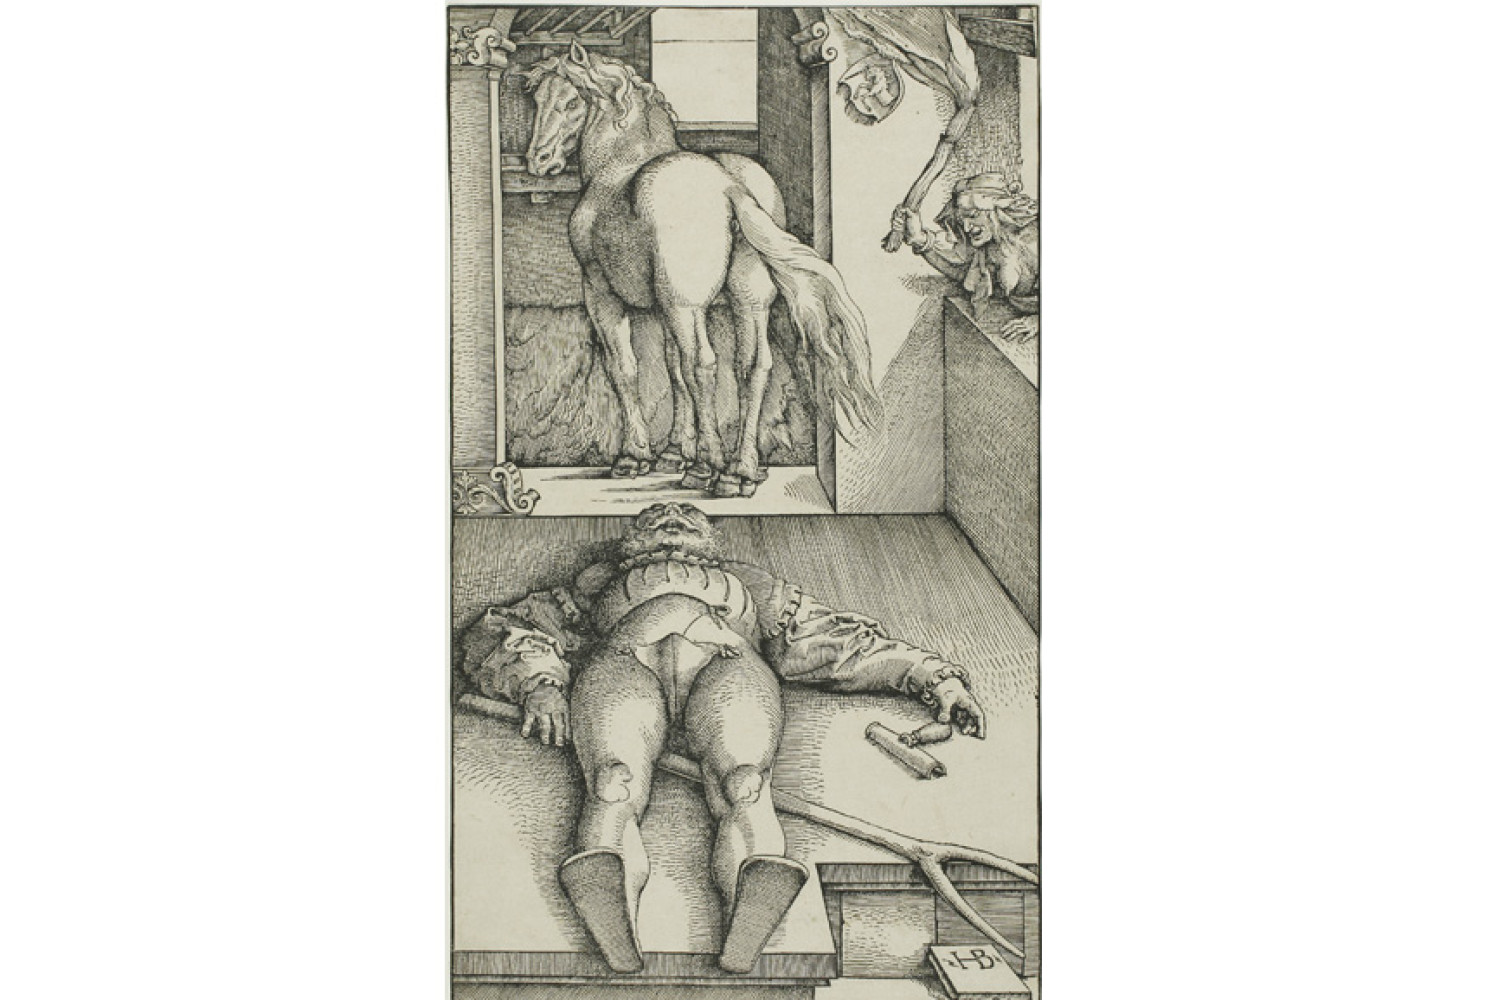 The Bewitched Groom, 1544 - 45; By Hans Baldung Grien (German, 1475 - 1545); Woodcut ; 21.5 x 16 inches framed; Courtesy of a private collection